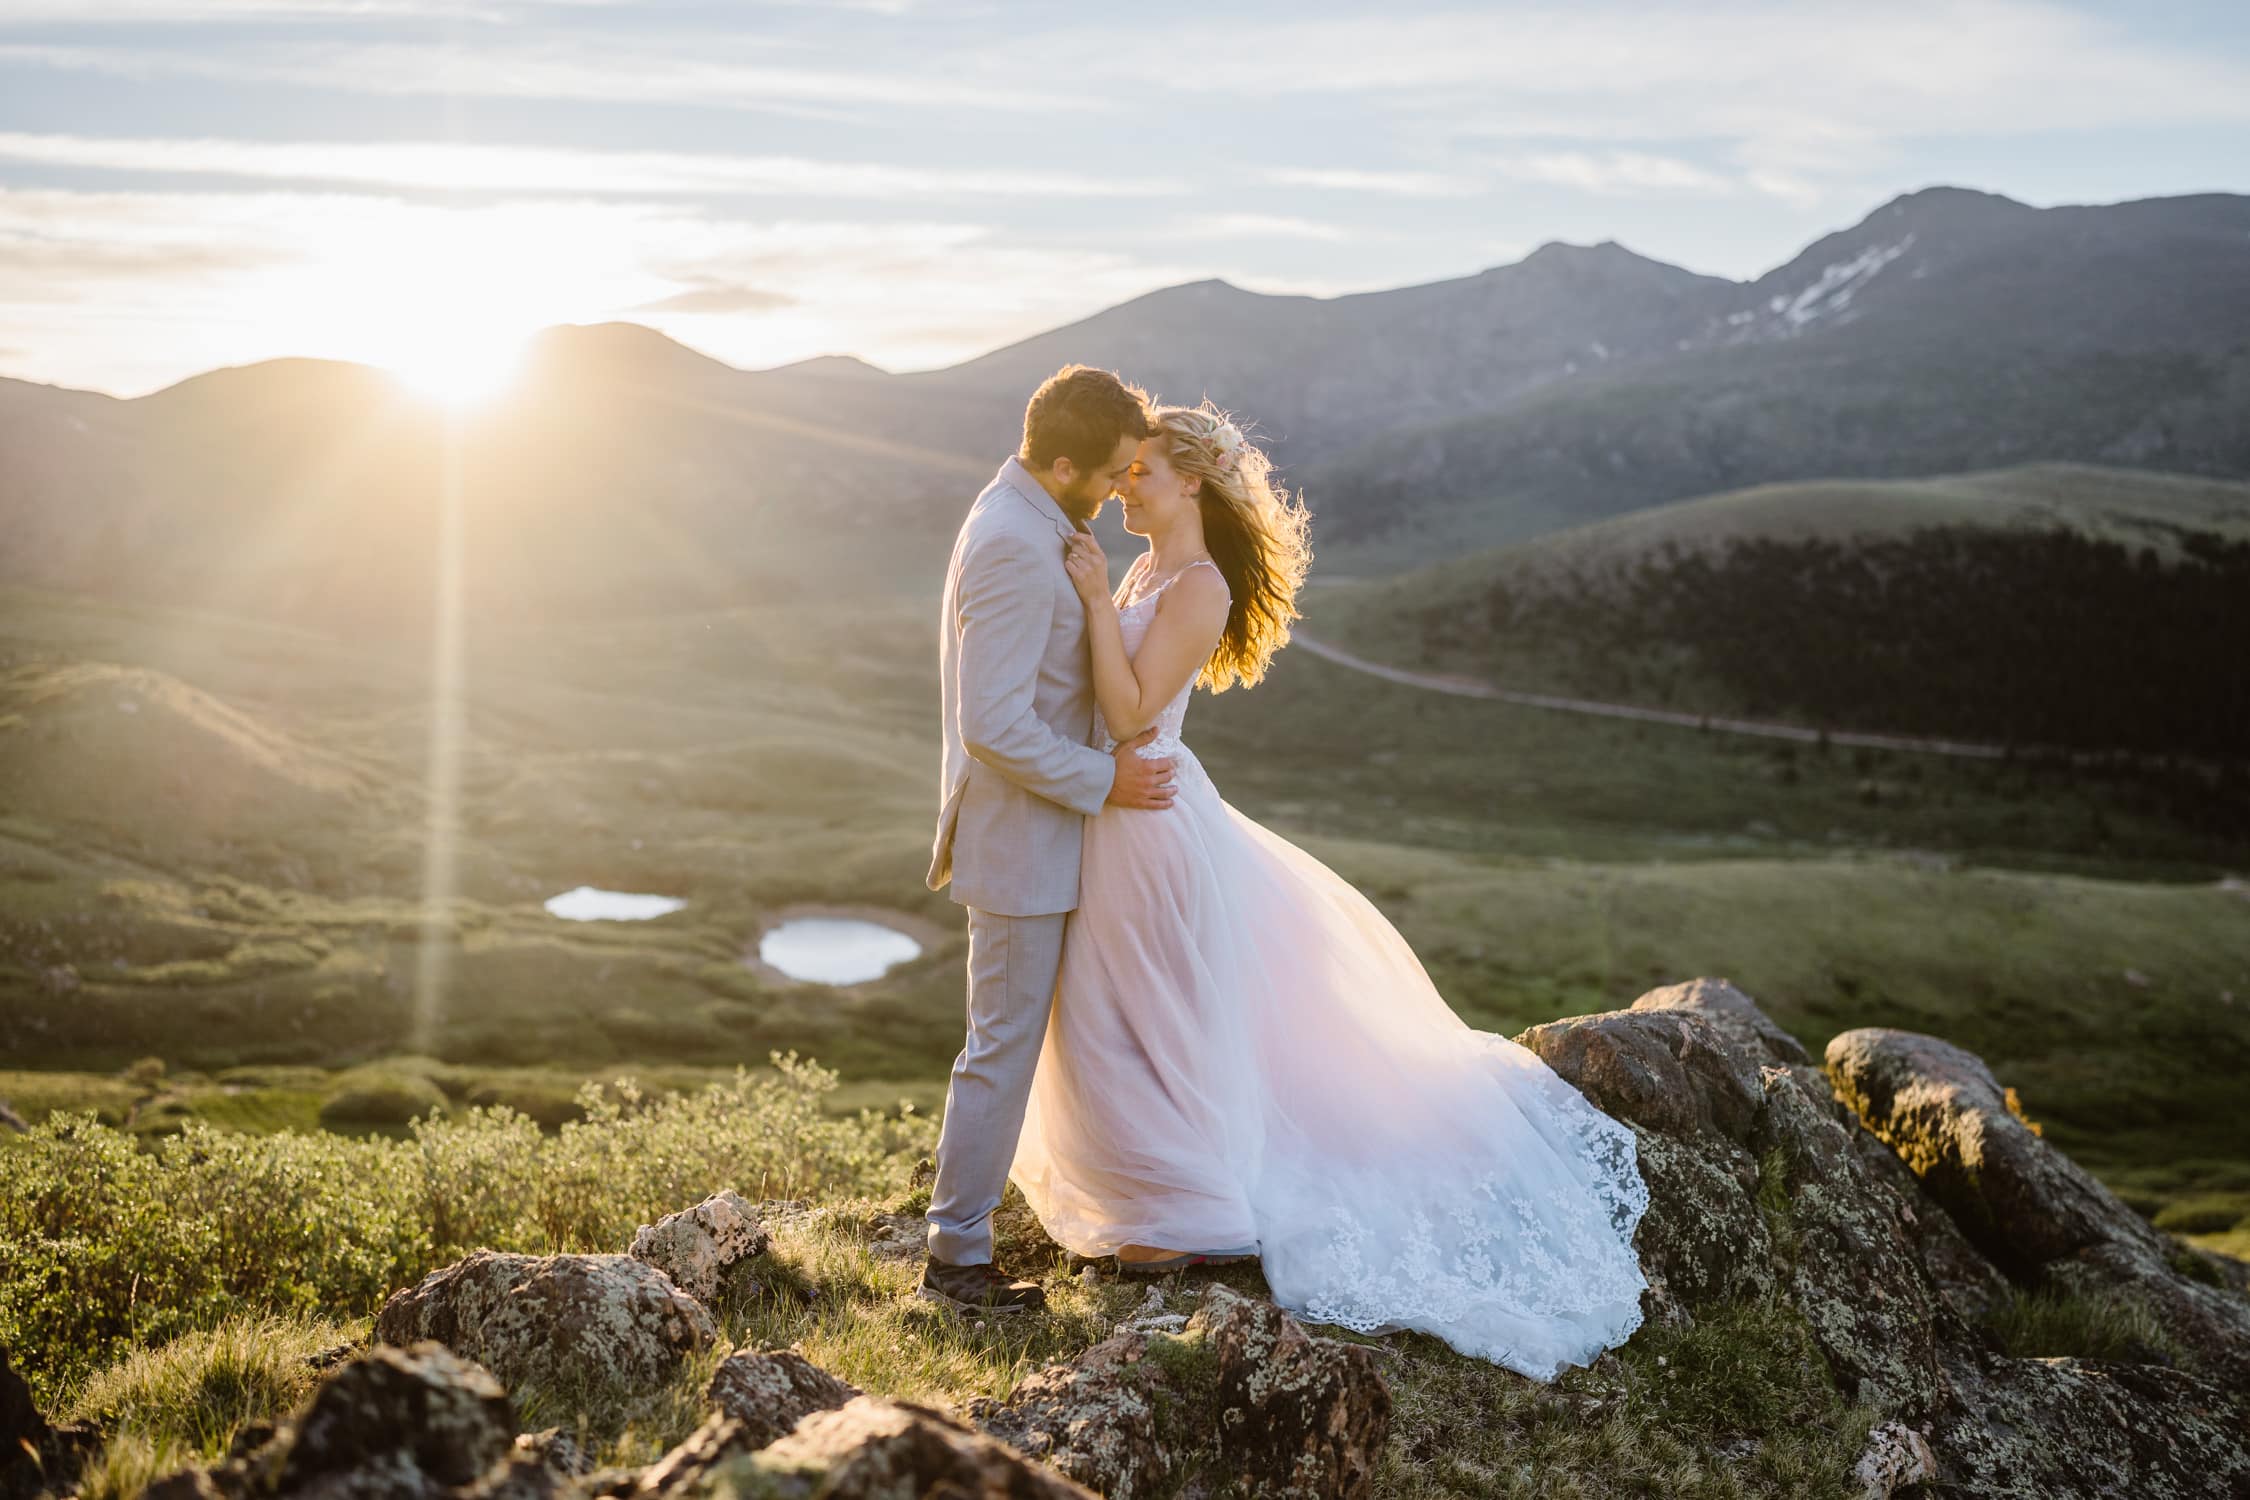 Bride and groom share a moment with the sun peaking over the mountain in the background.